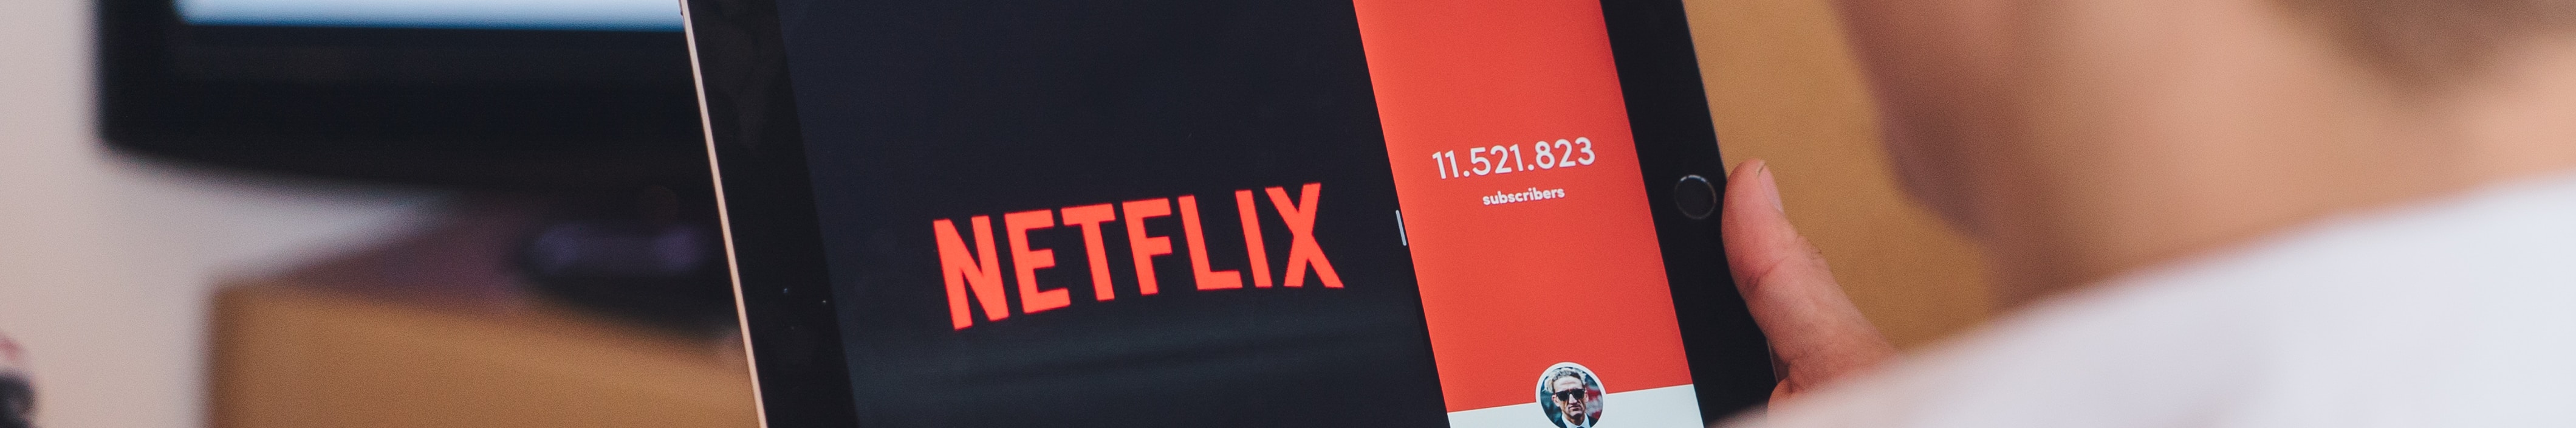 Netflix has reached gender parity at all levels except BOD, as of 2022